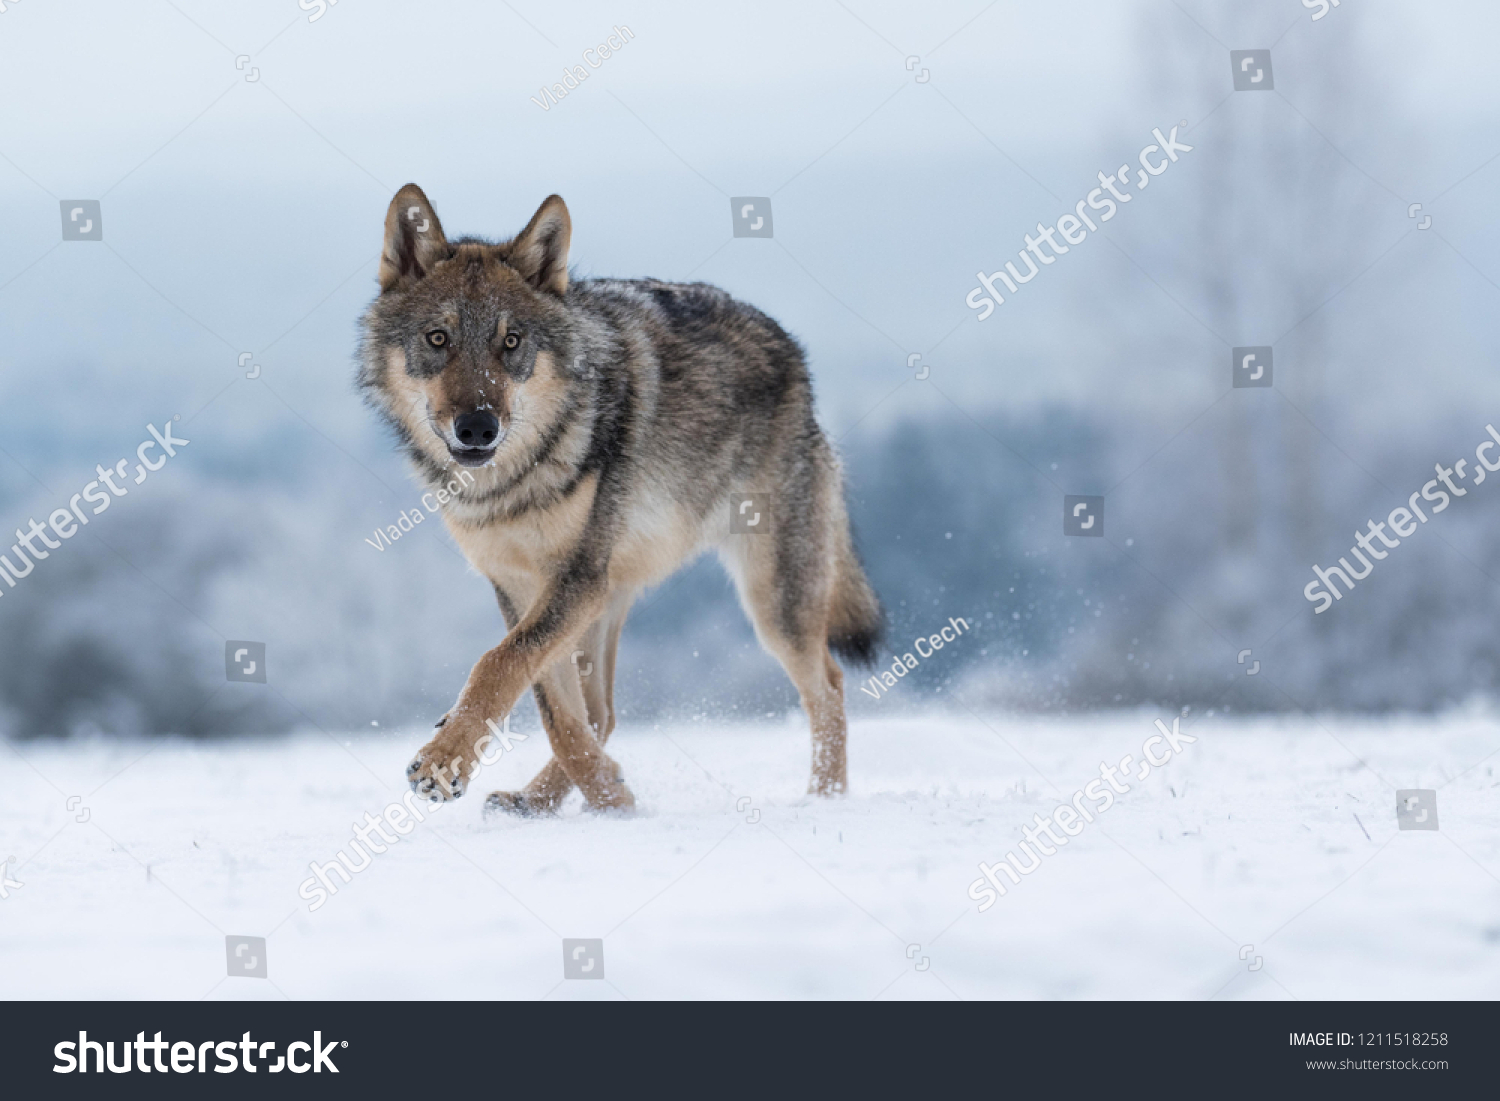 wolf in snow, attractive winter scene with wolf, close to wolf in snow #1211518258